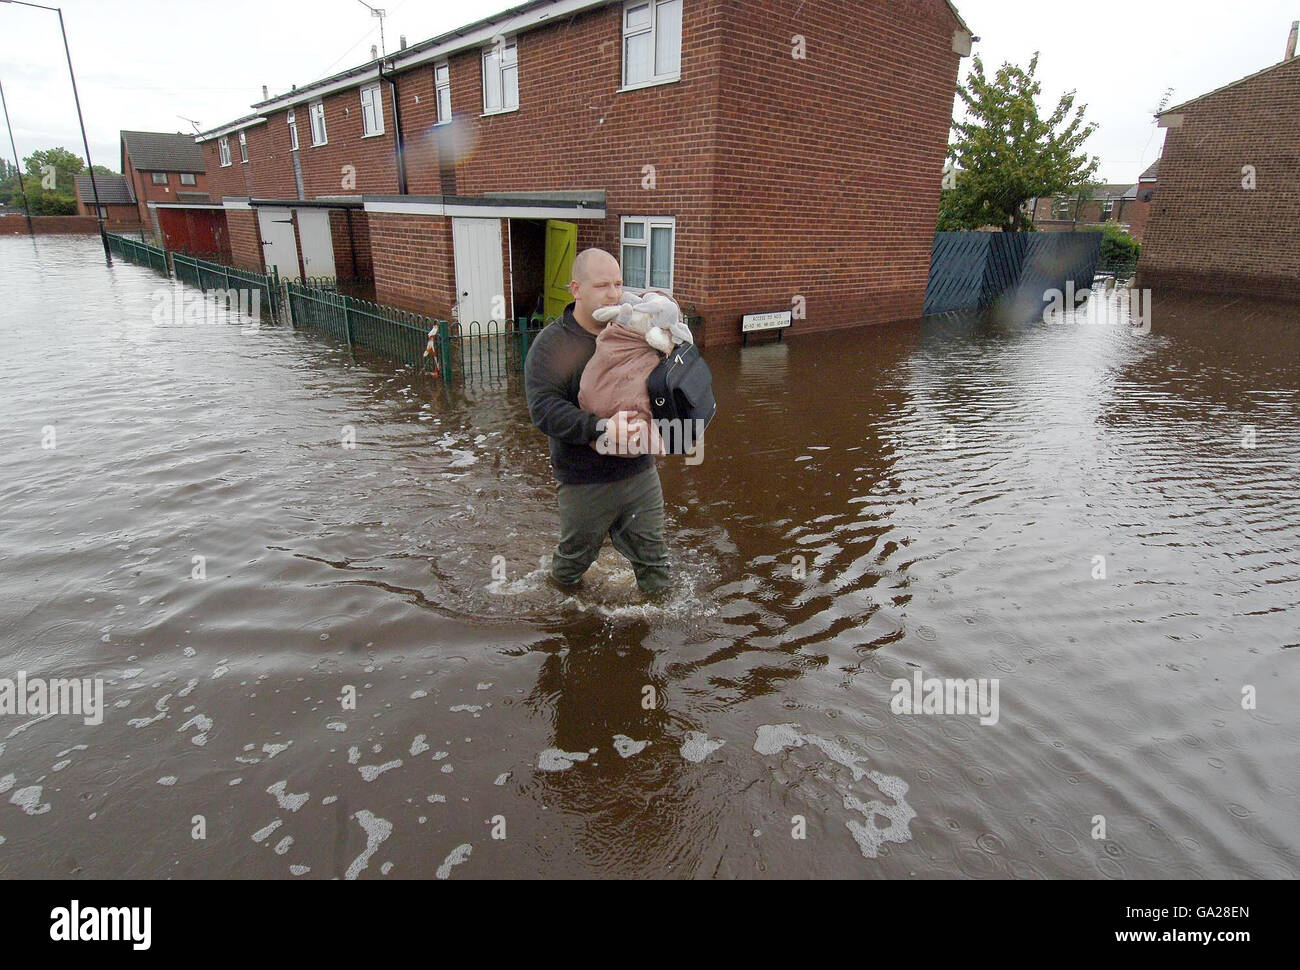 Returning home for a few possessions,Carll Harris of Toll Bar near Doncaster went back to his house in the village for the first time today since the floods. The house was still badly flooded but is lowly receding. Stock Photo